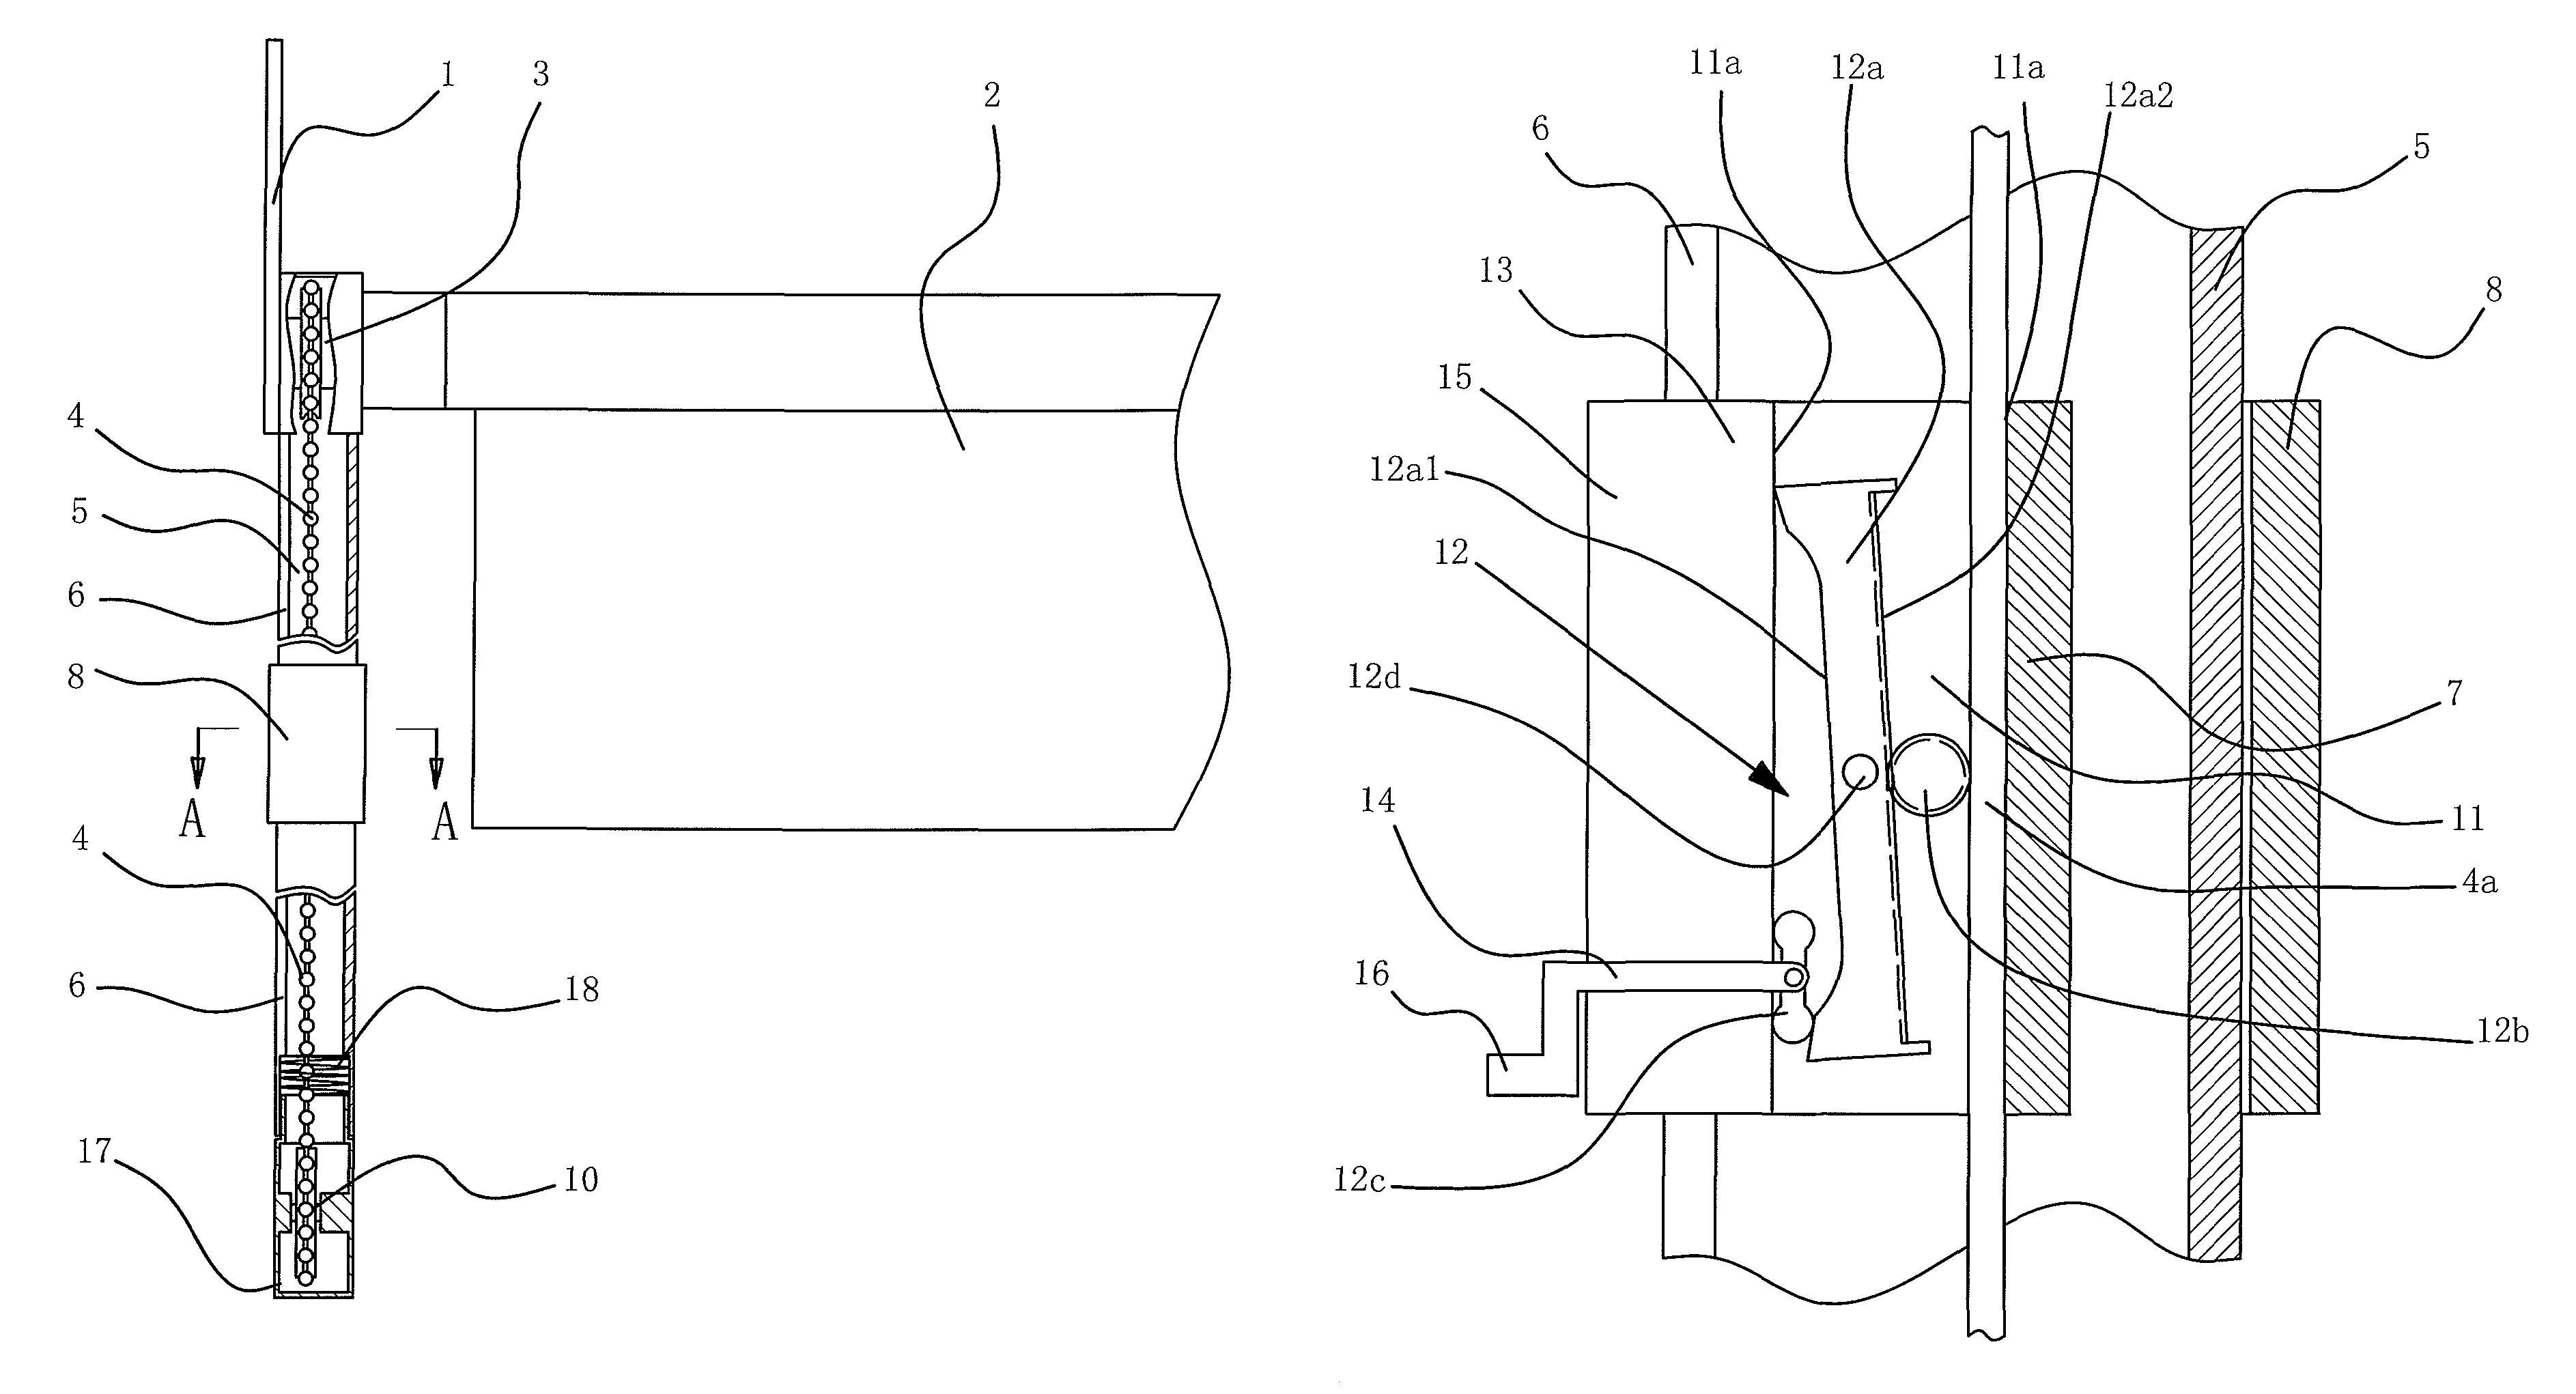 Bidirectionally operable/switchable pull cord mechanism for a window shade